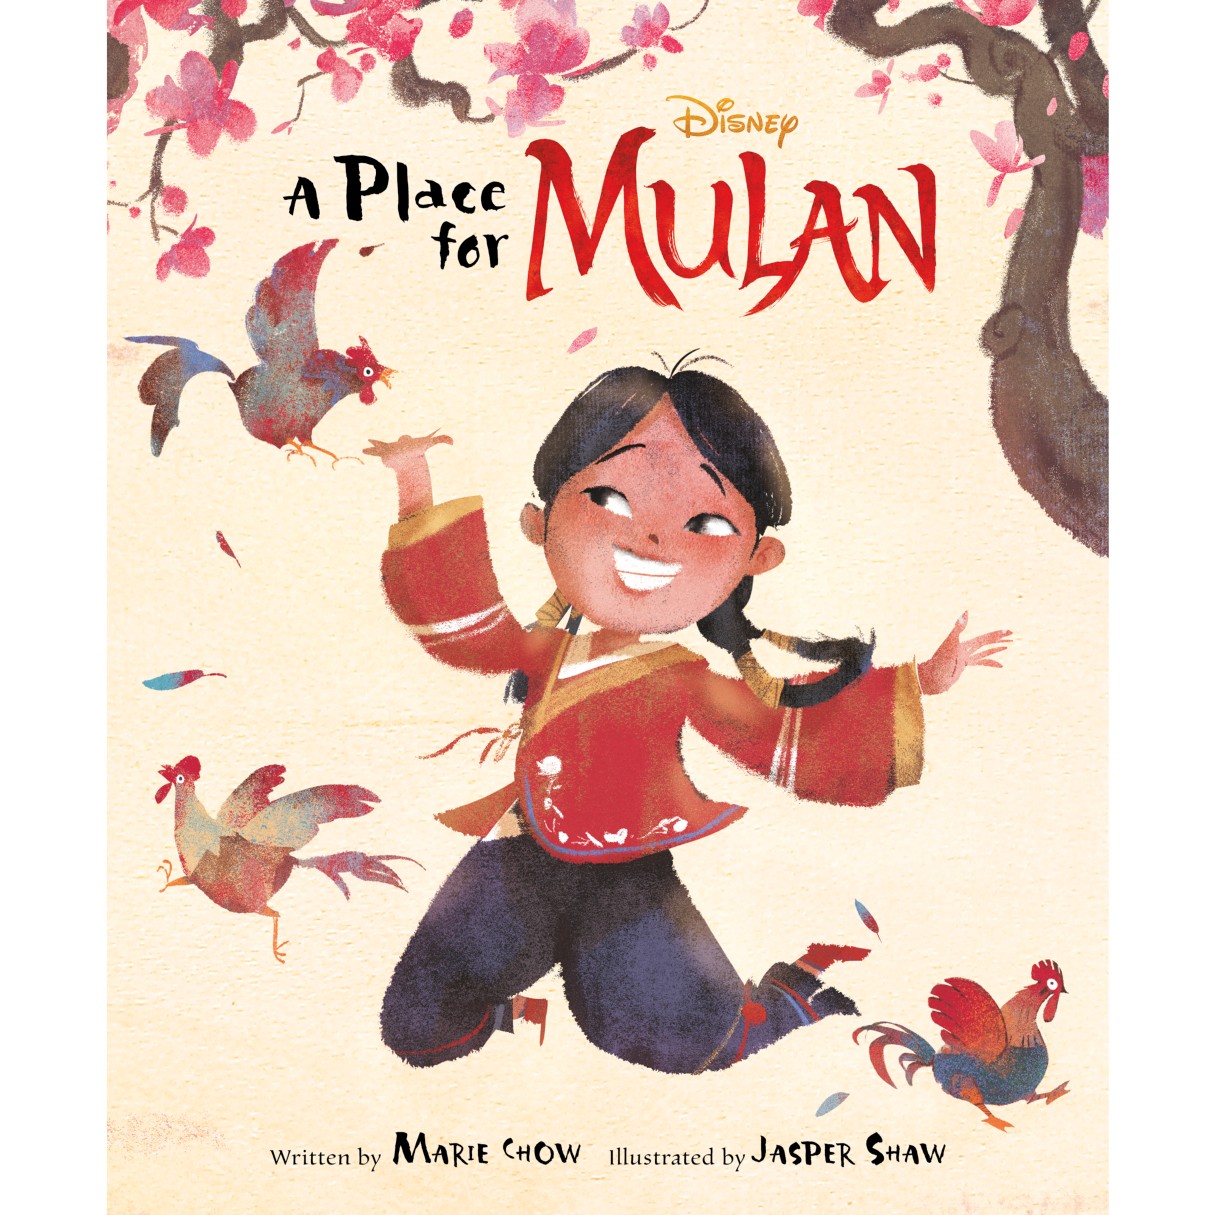 A Place for Mulan Book – Live Action Film